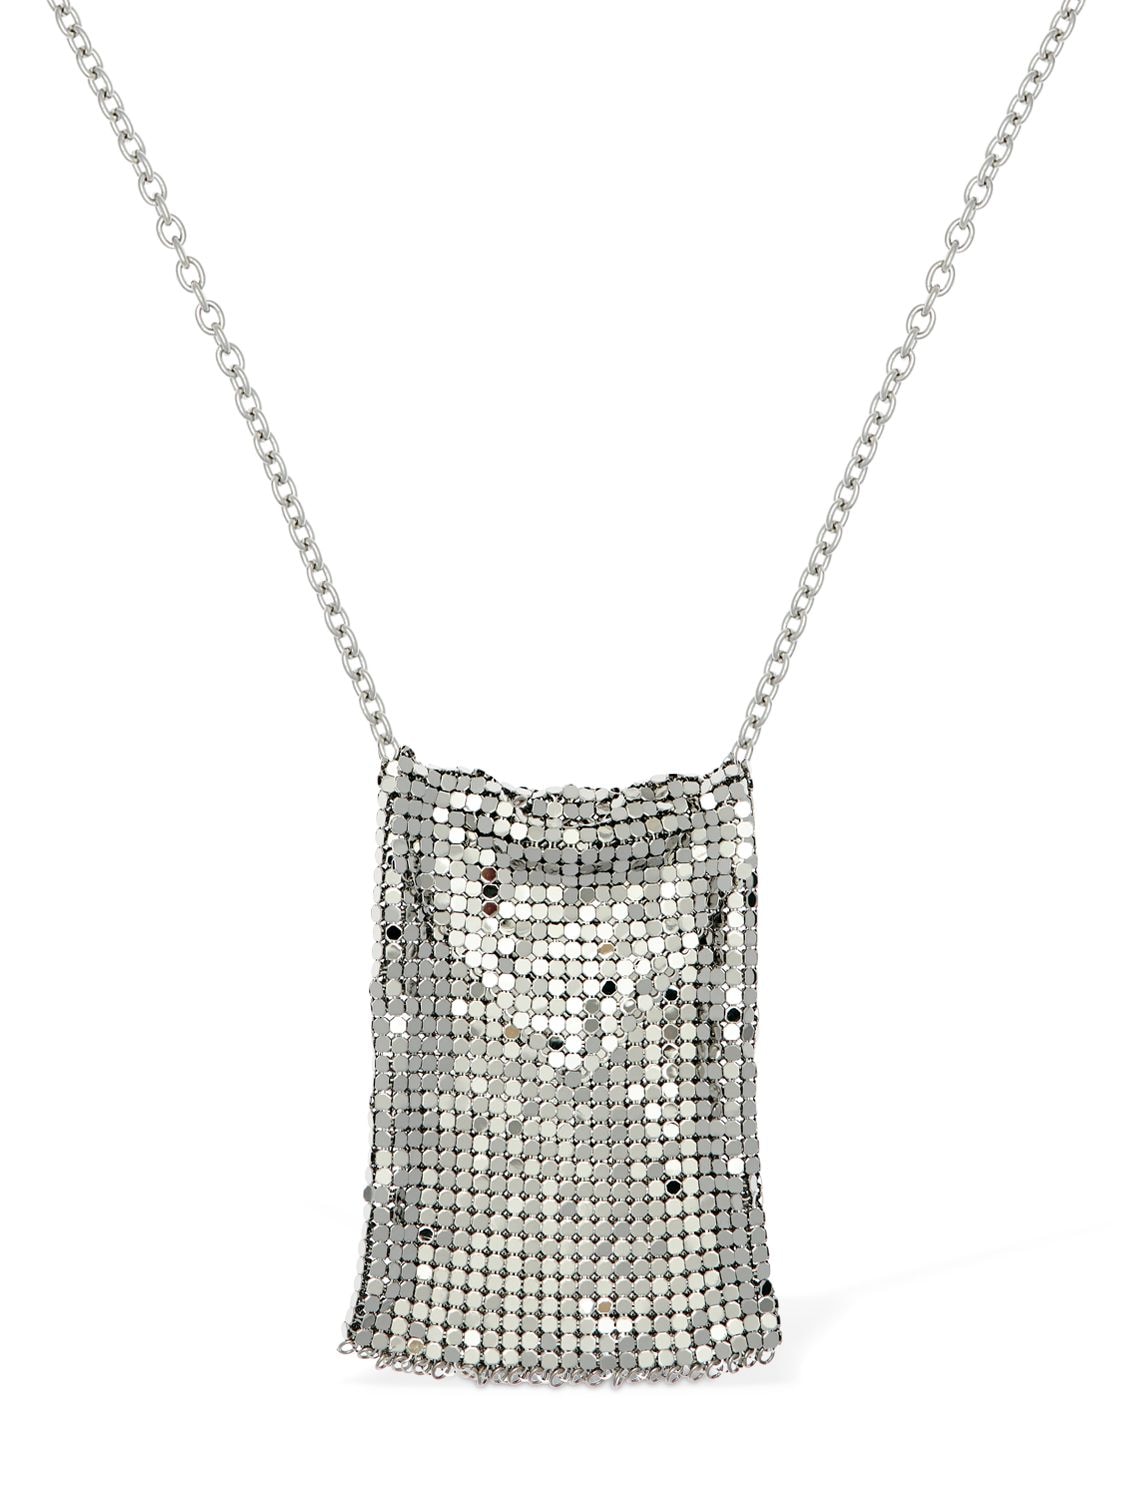 PACO RABANNE LARGE CHAINMAIL POUCH NECKLACE,71IG2J017-UDA0MA2